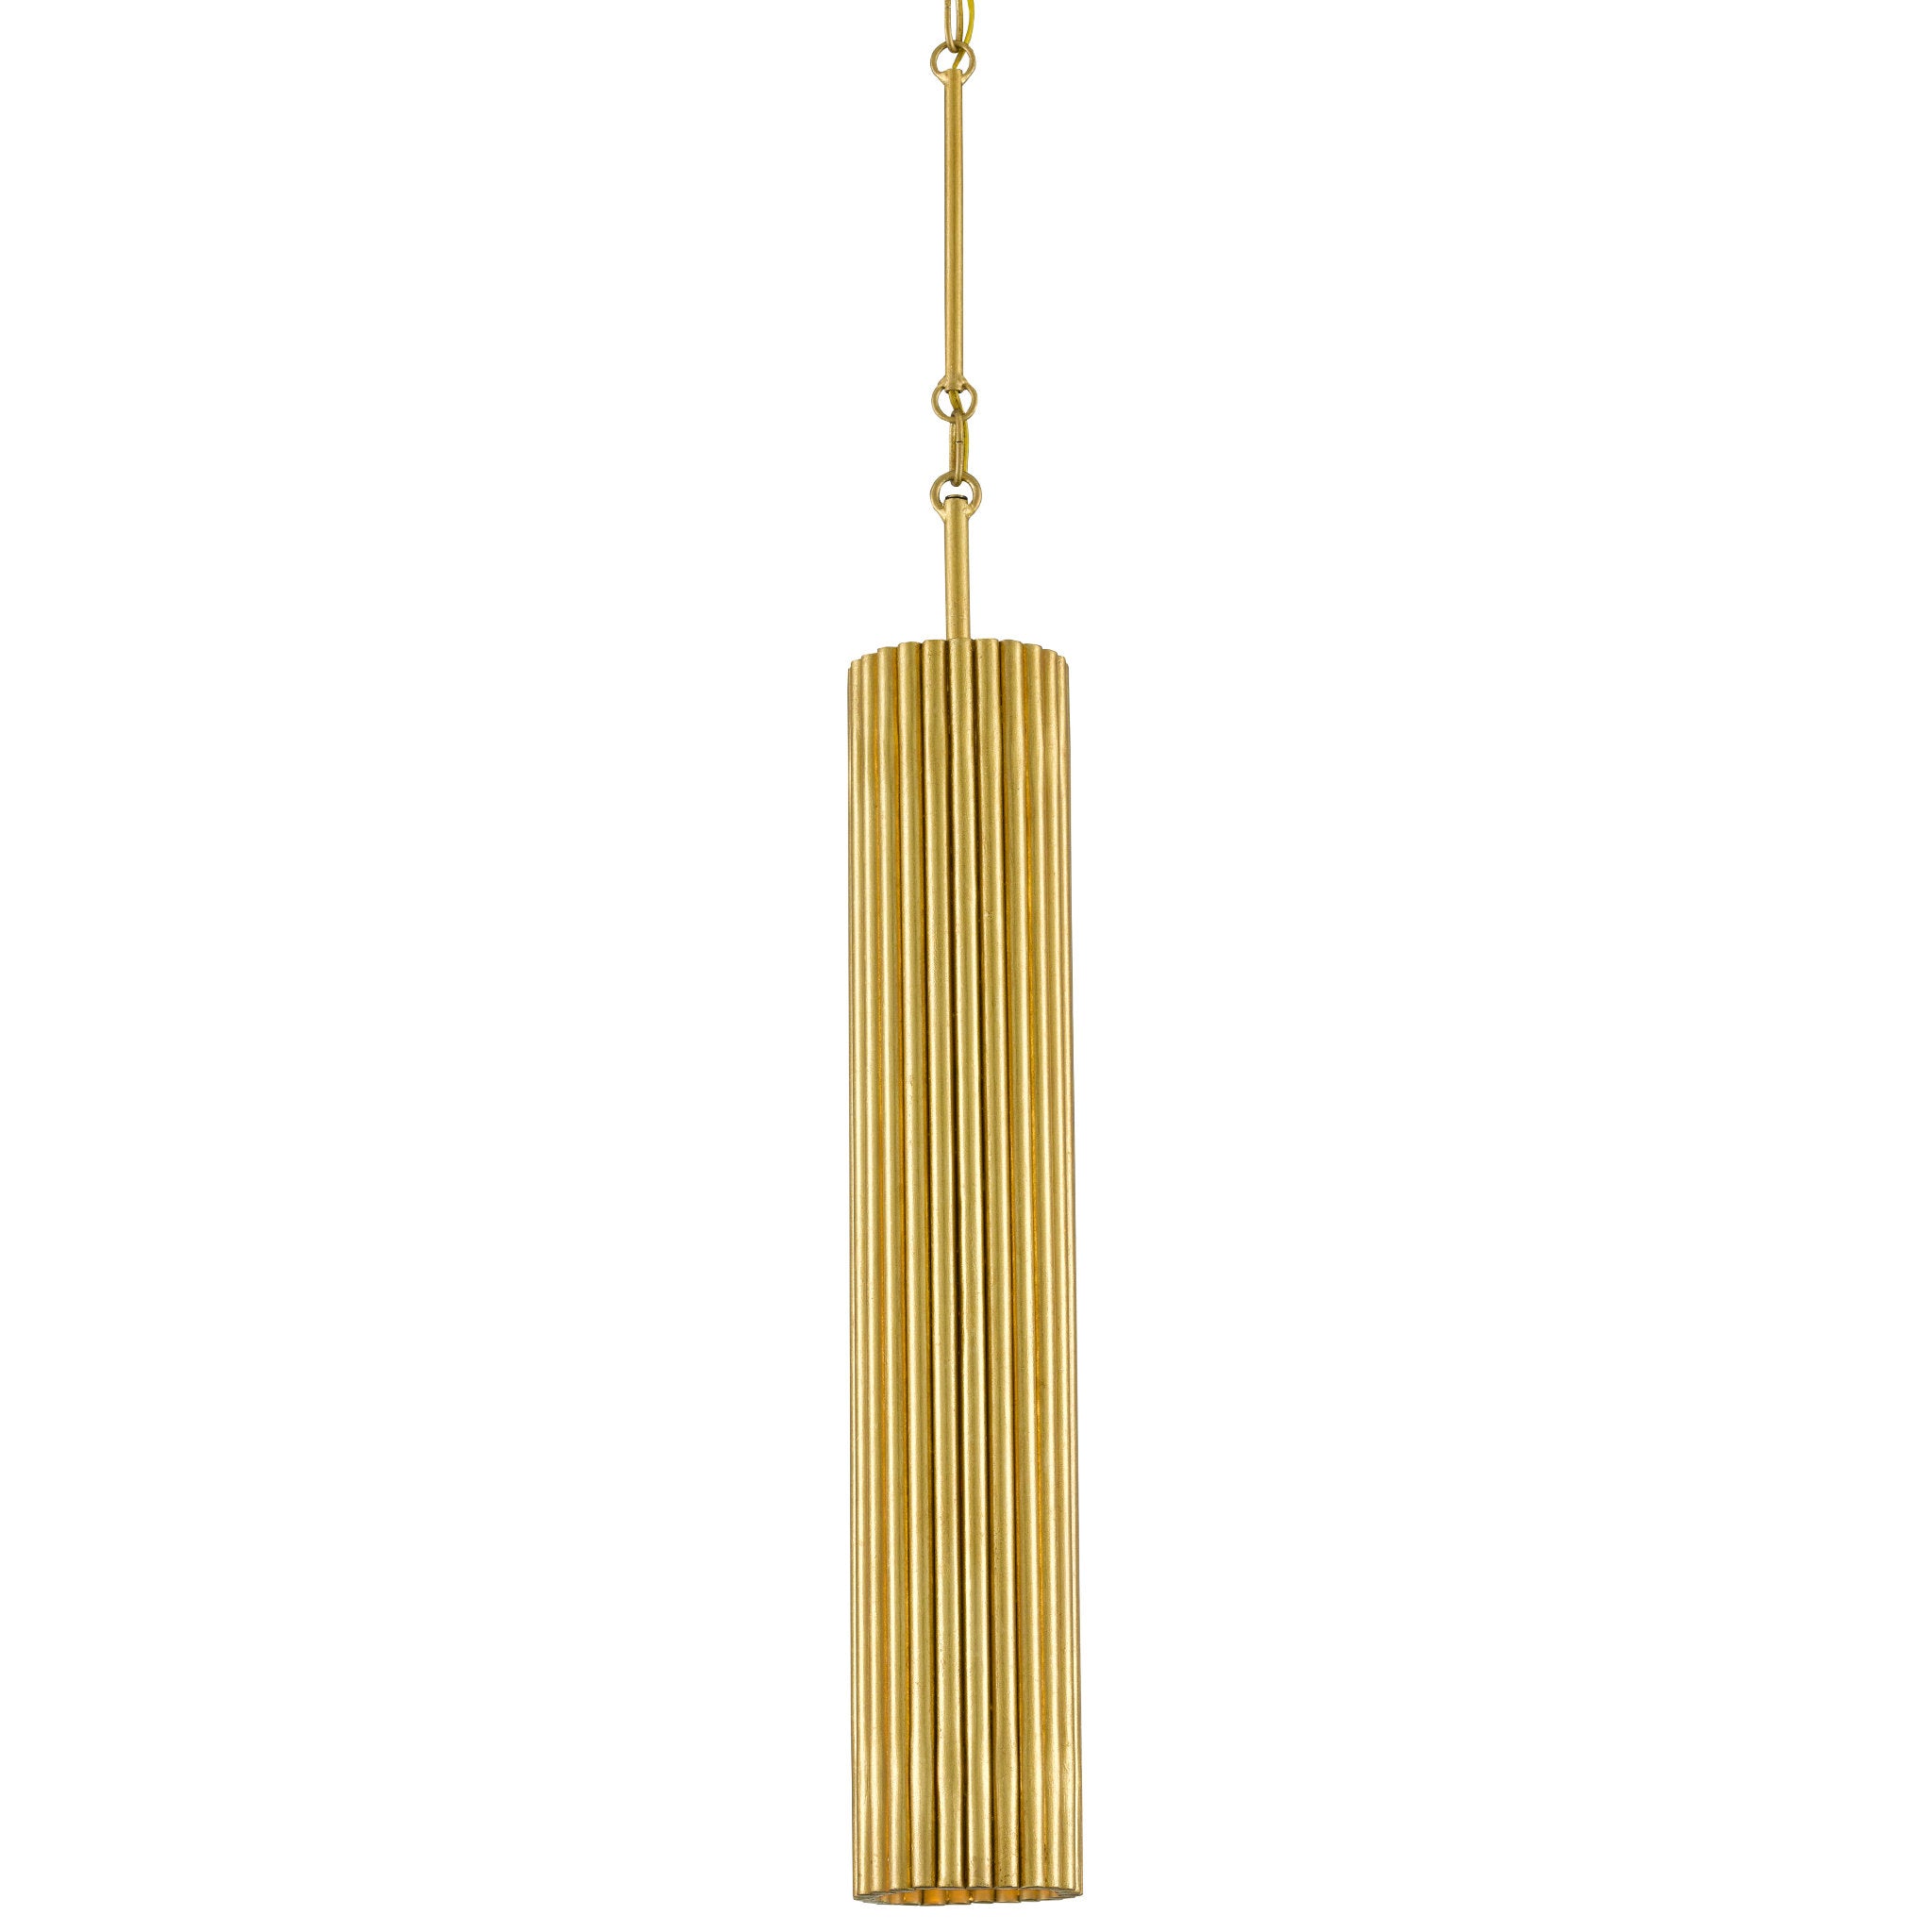 Penfold Gold Pendant - Contemporary Gold Leaf/Painted Contemporary Gold